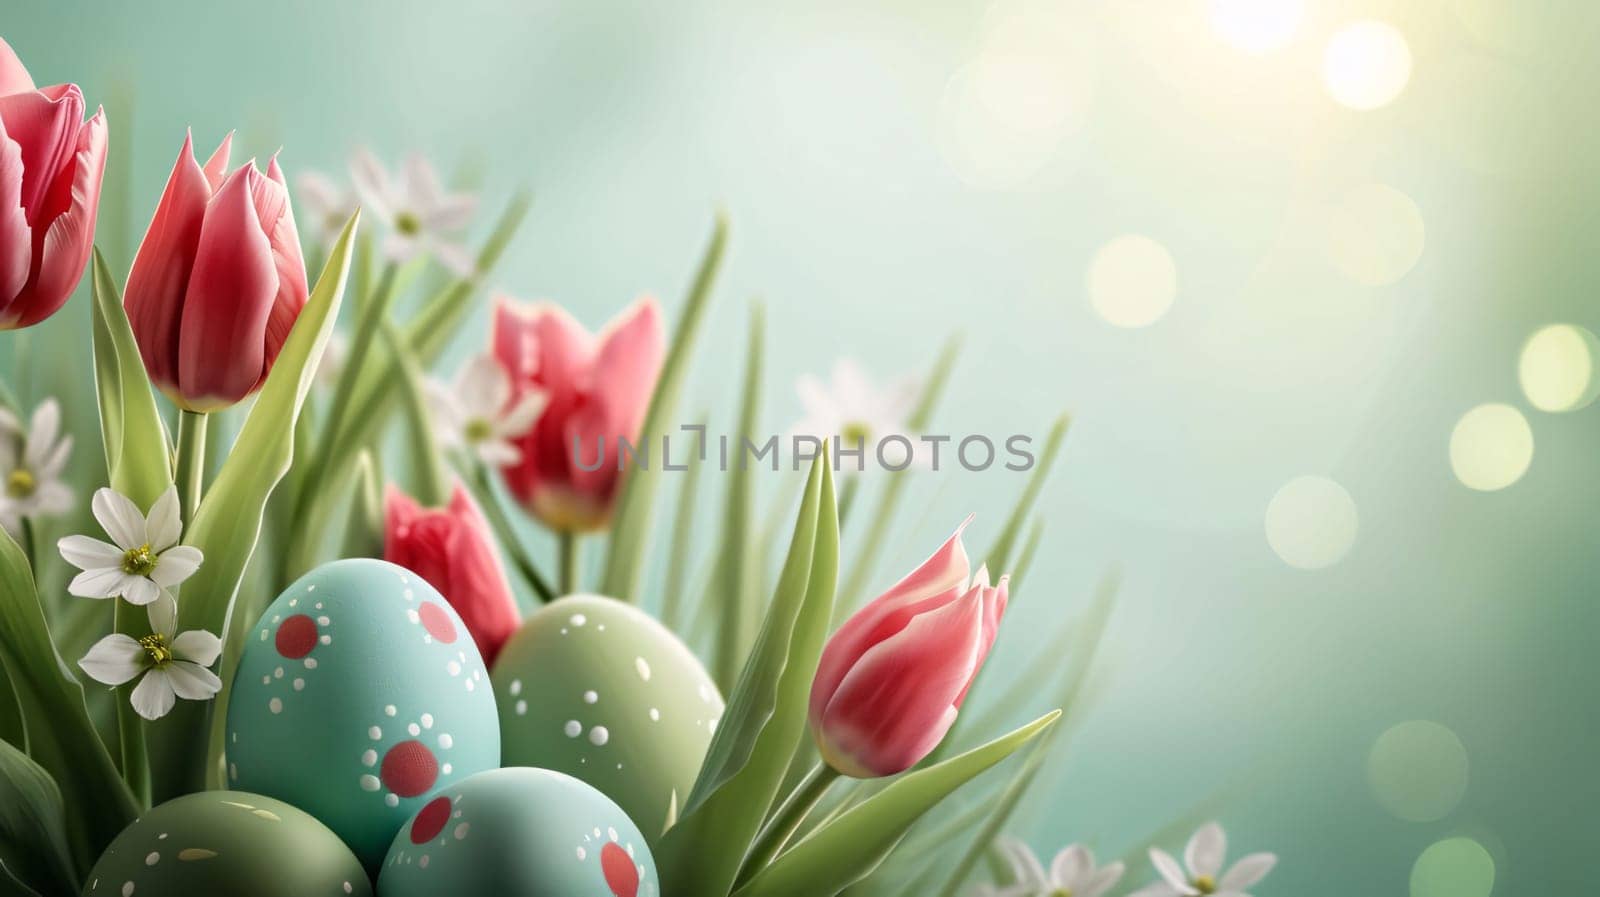 Feasts of the Lord's Resurrection: Easter eggs and tulips on green bokeh background with copy space